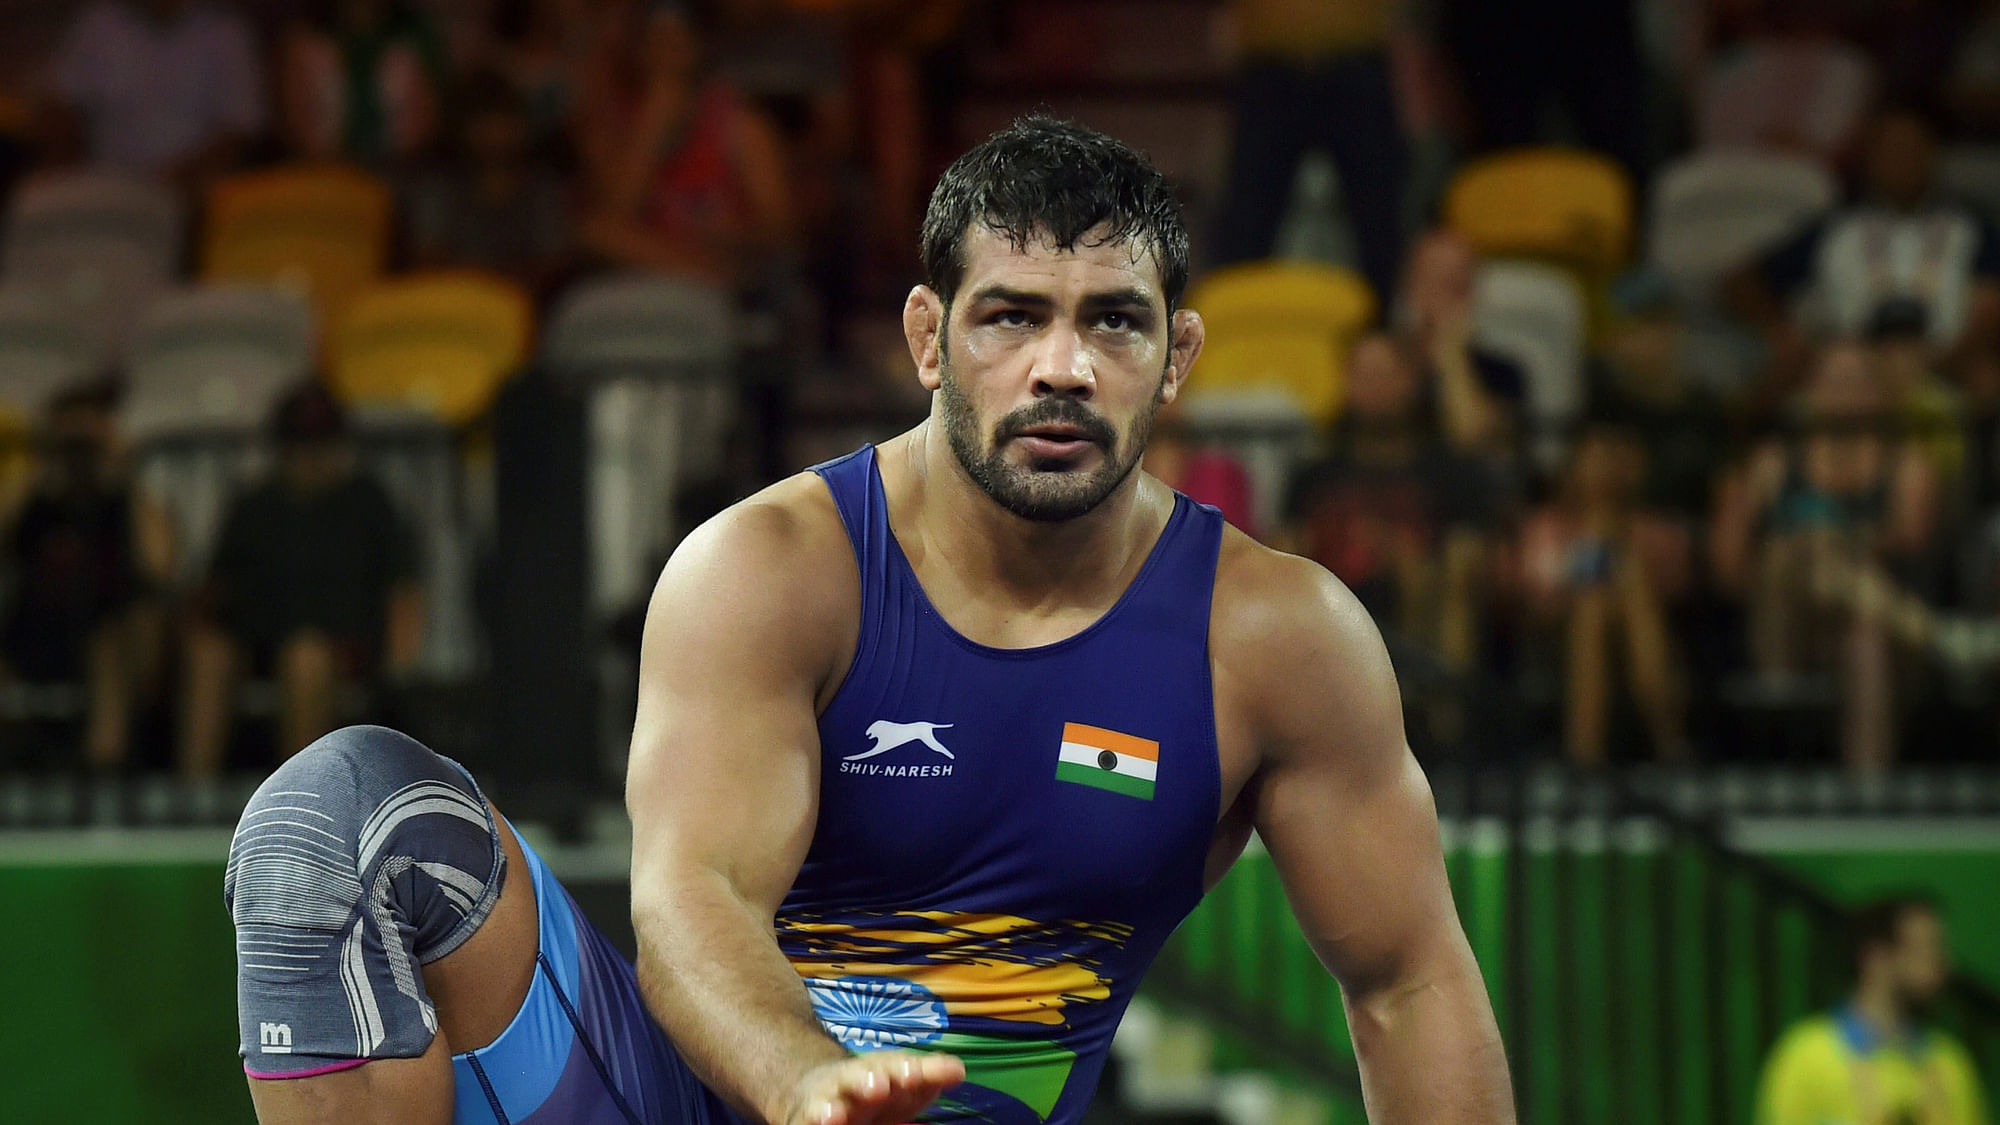 Indian wrestler Sushil Kumar lost his opening bout at the 2018 Asian Games.